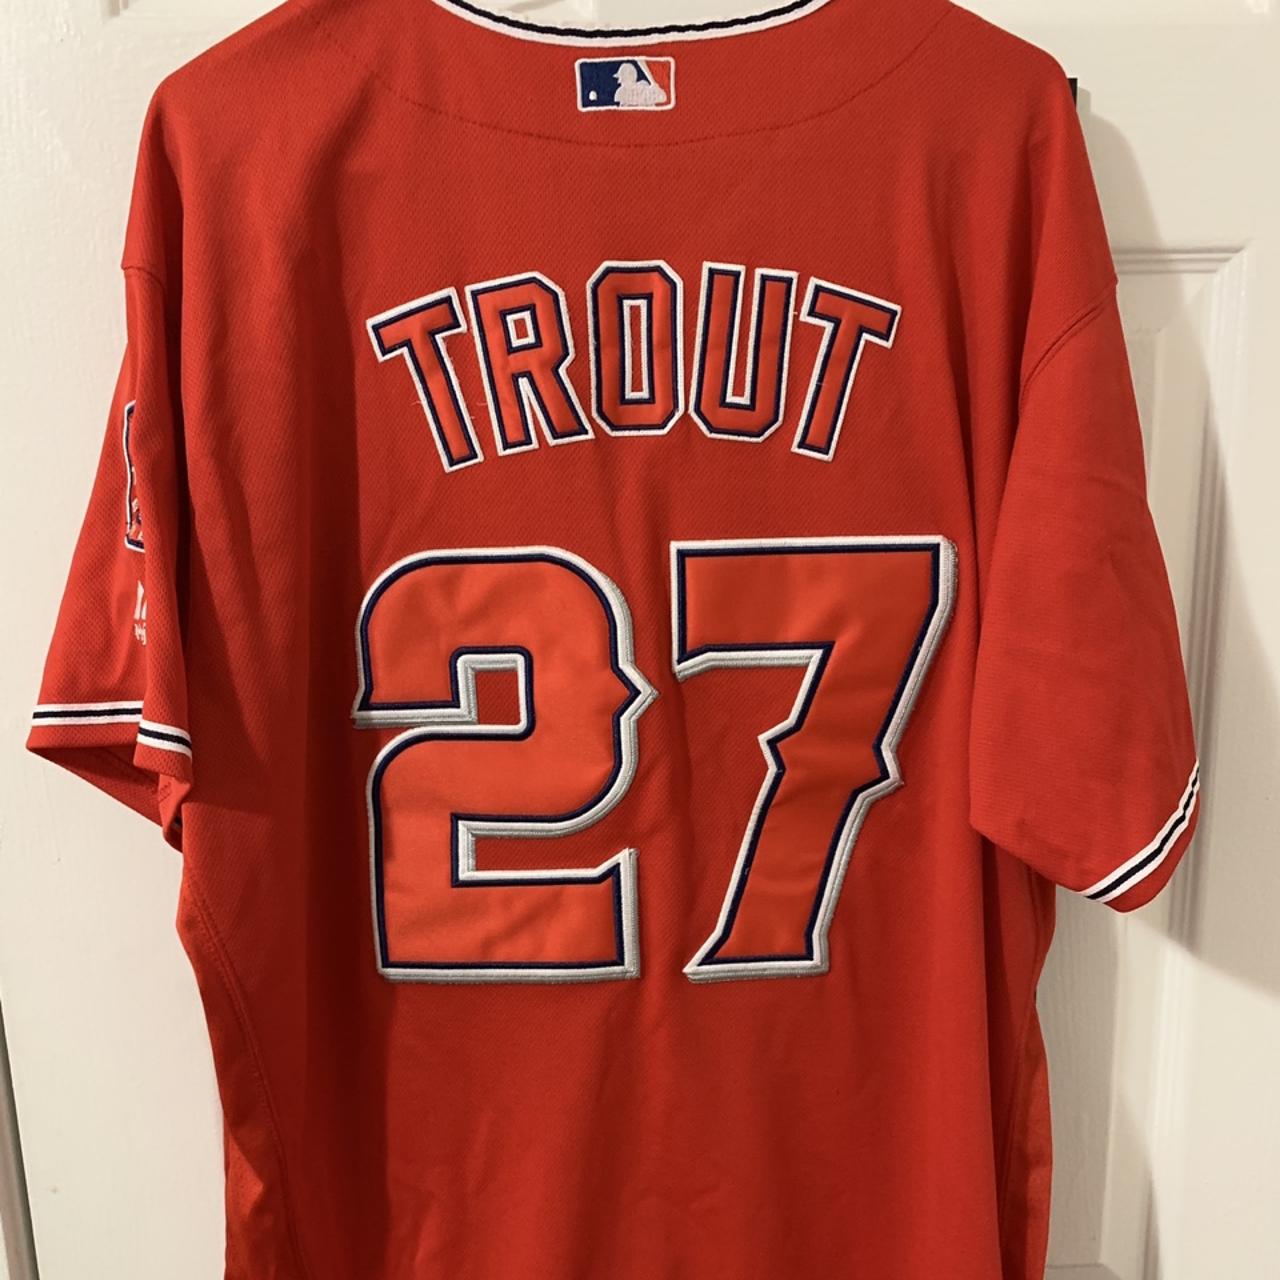 ANGELS BASEBALL JERSEY MIKE TROUT JERSEY YOUTH XL, - Depop